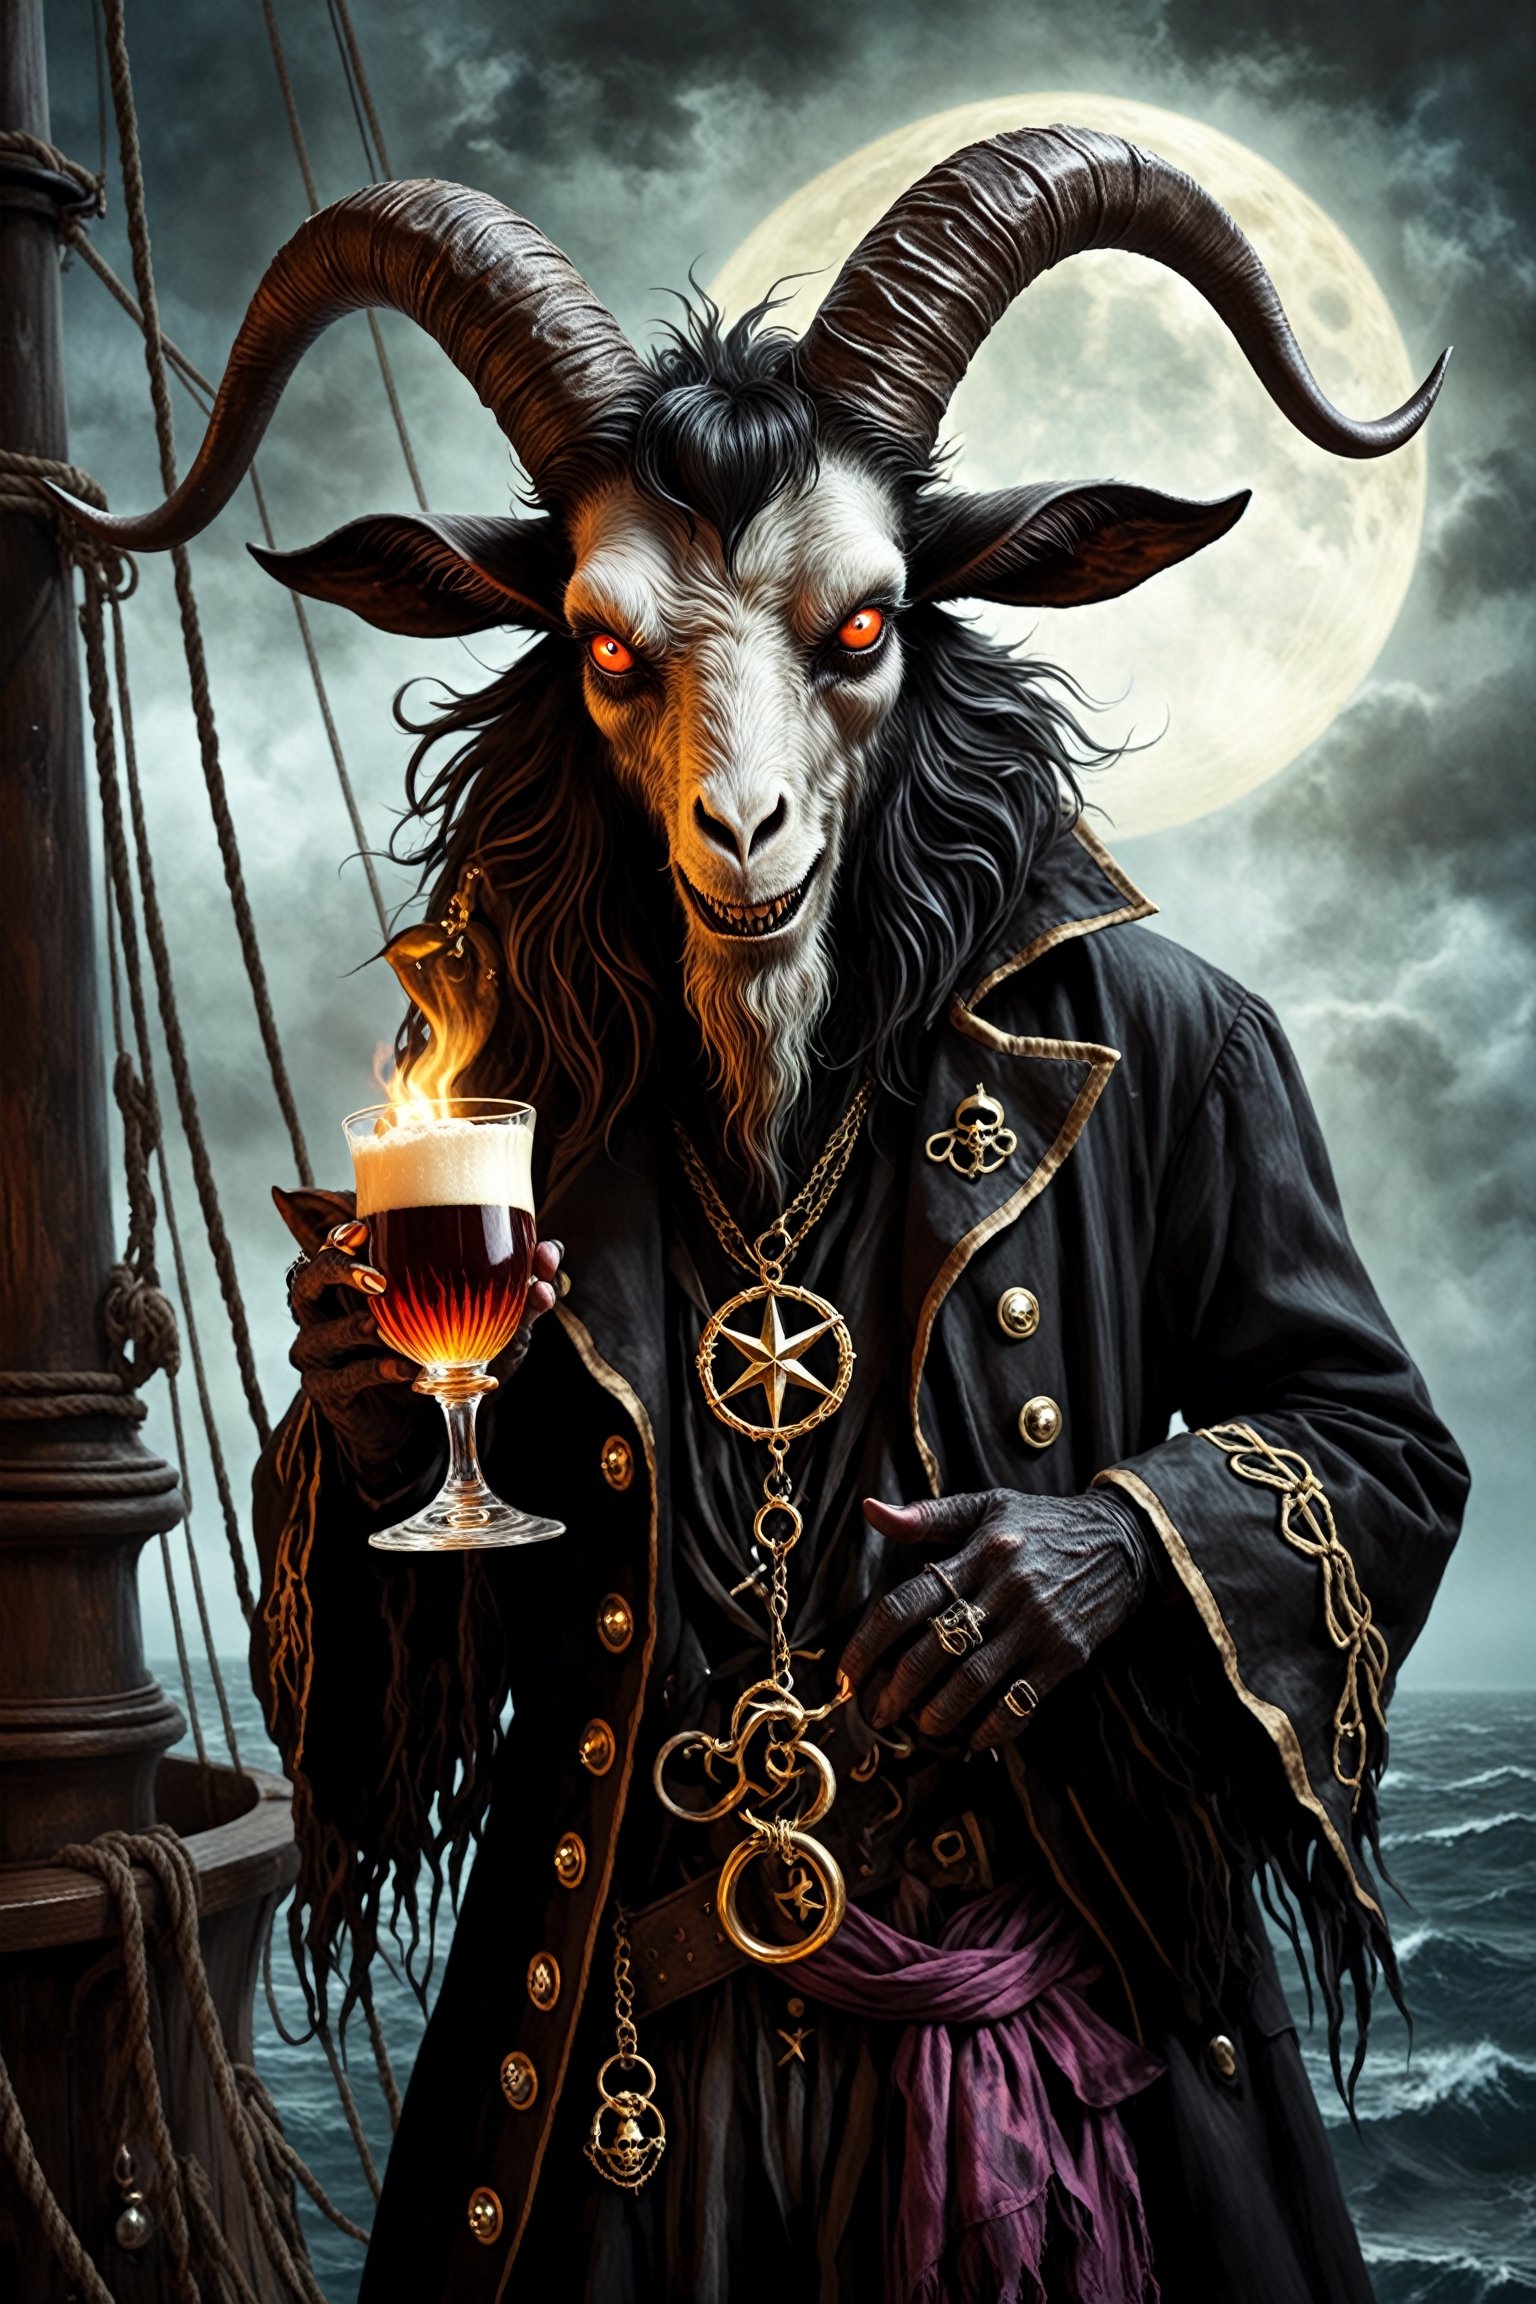 1 man,cool monster,maximum detail,
Baphomet, a demonic being, black goat head demon, a demon dressed as a pirate, a pentagram painted on it and a tattered coat, exuding a sinister mystery, with glowing eyes and a twisted smile, Baphomet holds a chalice filled with an otherworldly brew. Prowling the deck of a bewitched ship, Baphomet embodies the sinister allure of the pirate and his eternal hunger for souls..,LegendDarkFantasy,pirate,monster, in the style of esao andrews